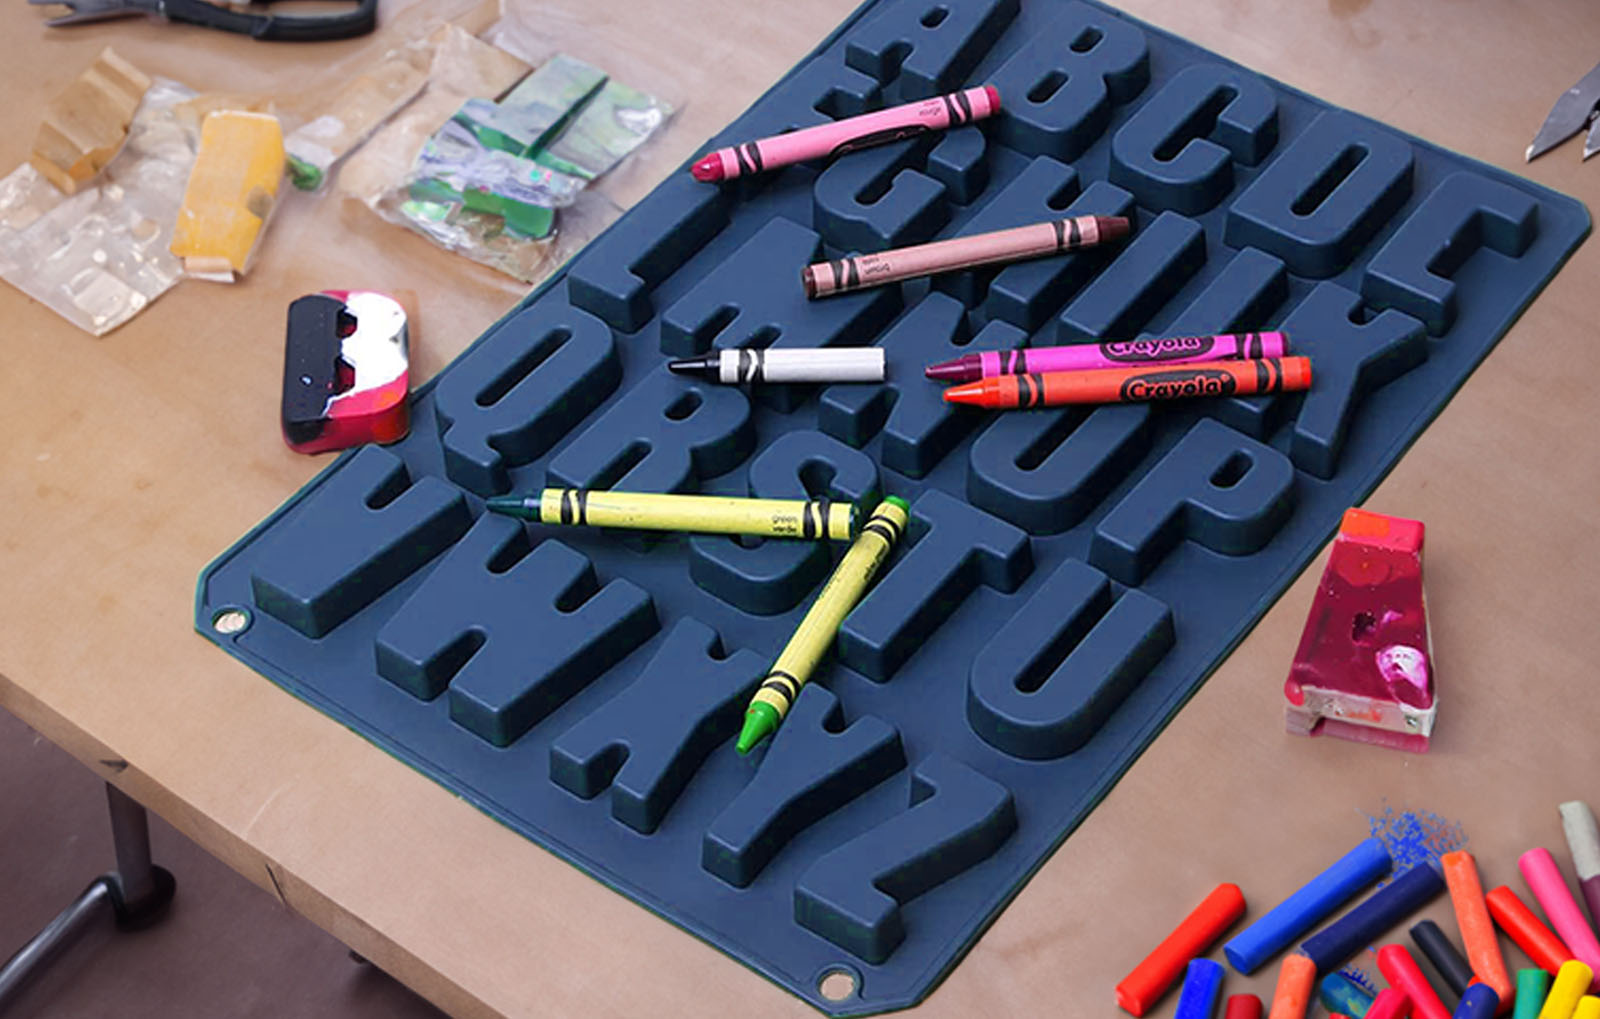 Alphabet Silicone Mold - Crafter's Choice